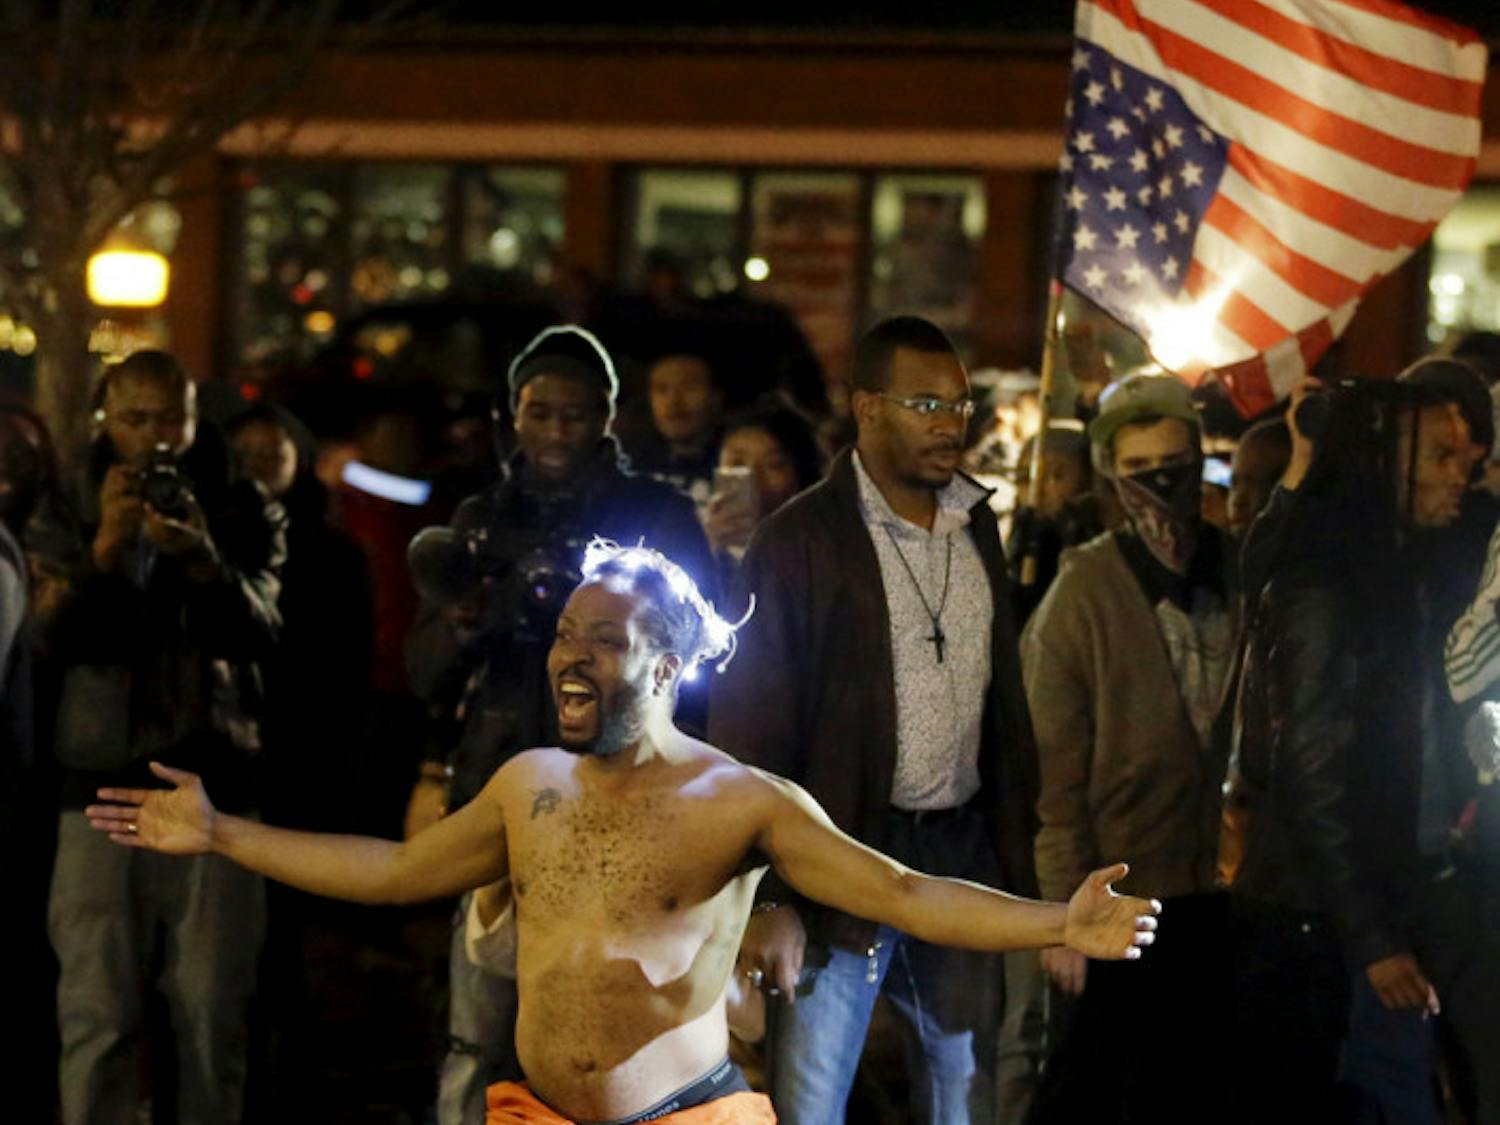 A man kneels in the middle of a street and yells at police before being arrested outside the Ferguson Police Department Saturday, Nov. 29, 2014, in Ferguson, Mo. (AP Photo/Jeff Roberson)